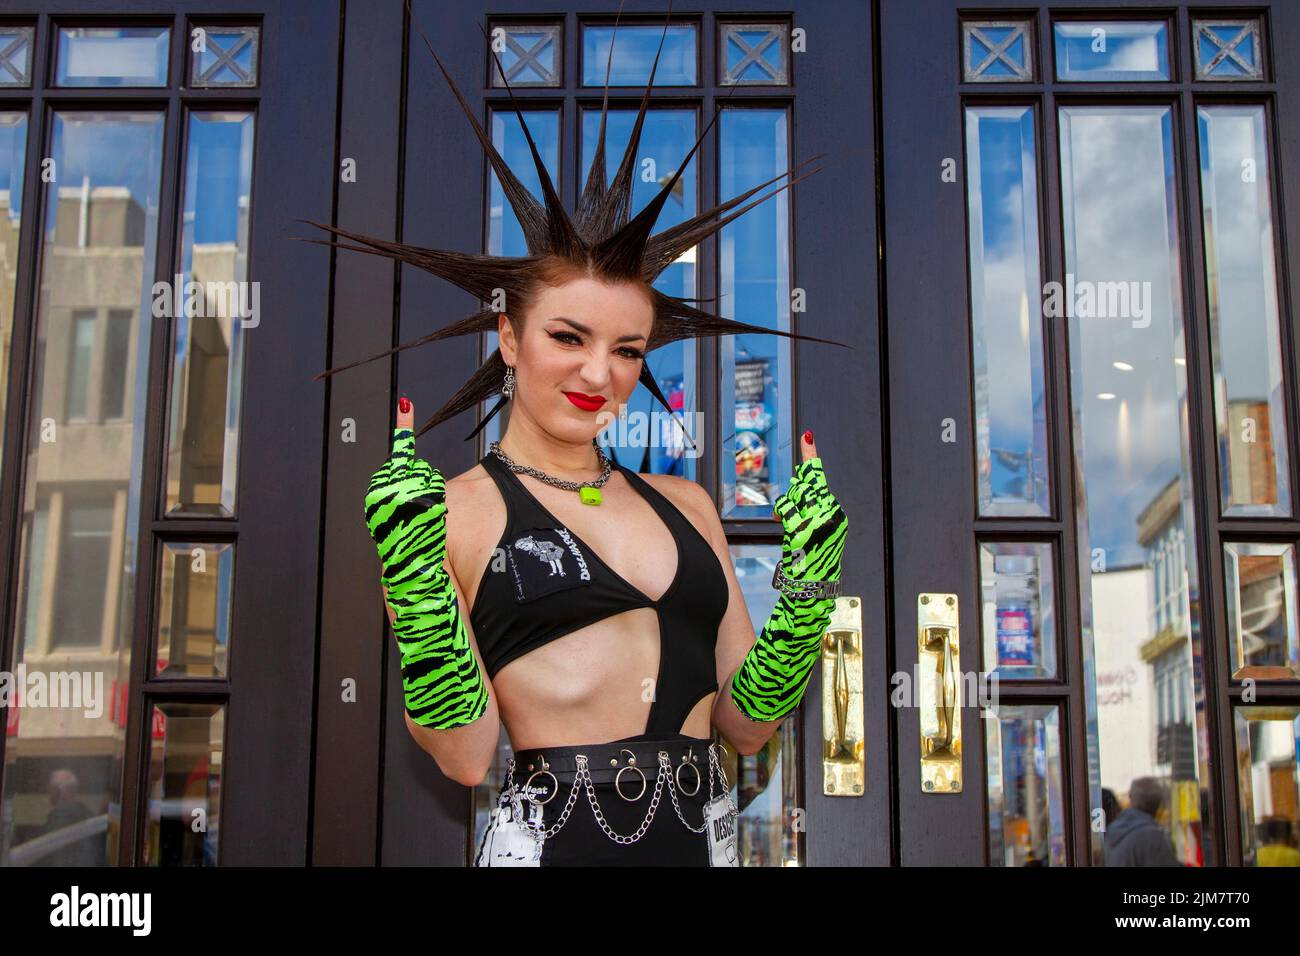 American model, SAG-AFTRA actress, wardrobe stylist, TV host. fashion designer,  with Mohican style, dyed hair and colouring at the Punk Rebellion festival at The Winter Gardens. A protest against conventional attitudes and behaviour, a clash of anti-establishment cultures,  mohawks, safety pins and a load of attitude at the seaside town as punks attending the annual Rebellion rock music festival at the Winter Gardens come shoulder to shoulder with traditional holidaymakers. Stock Photo